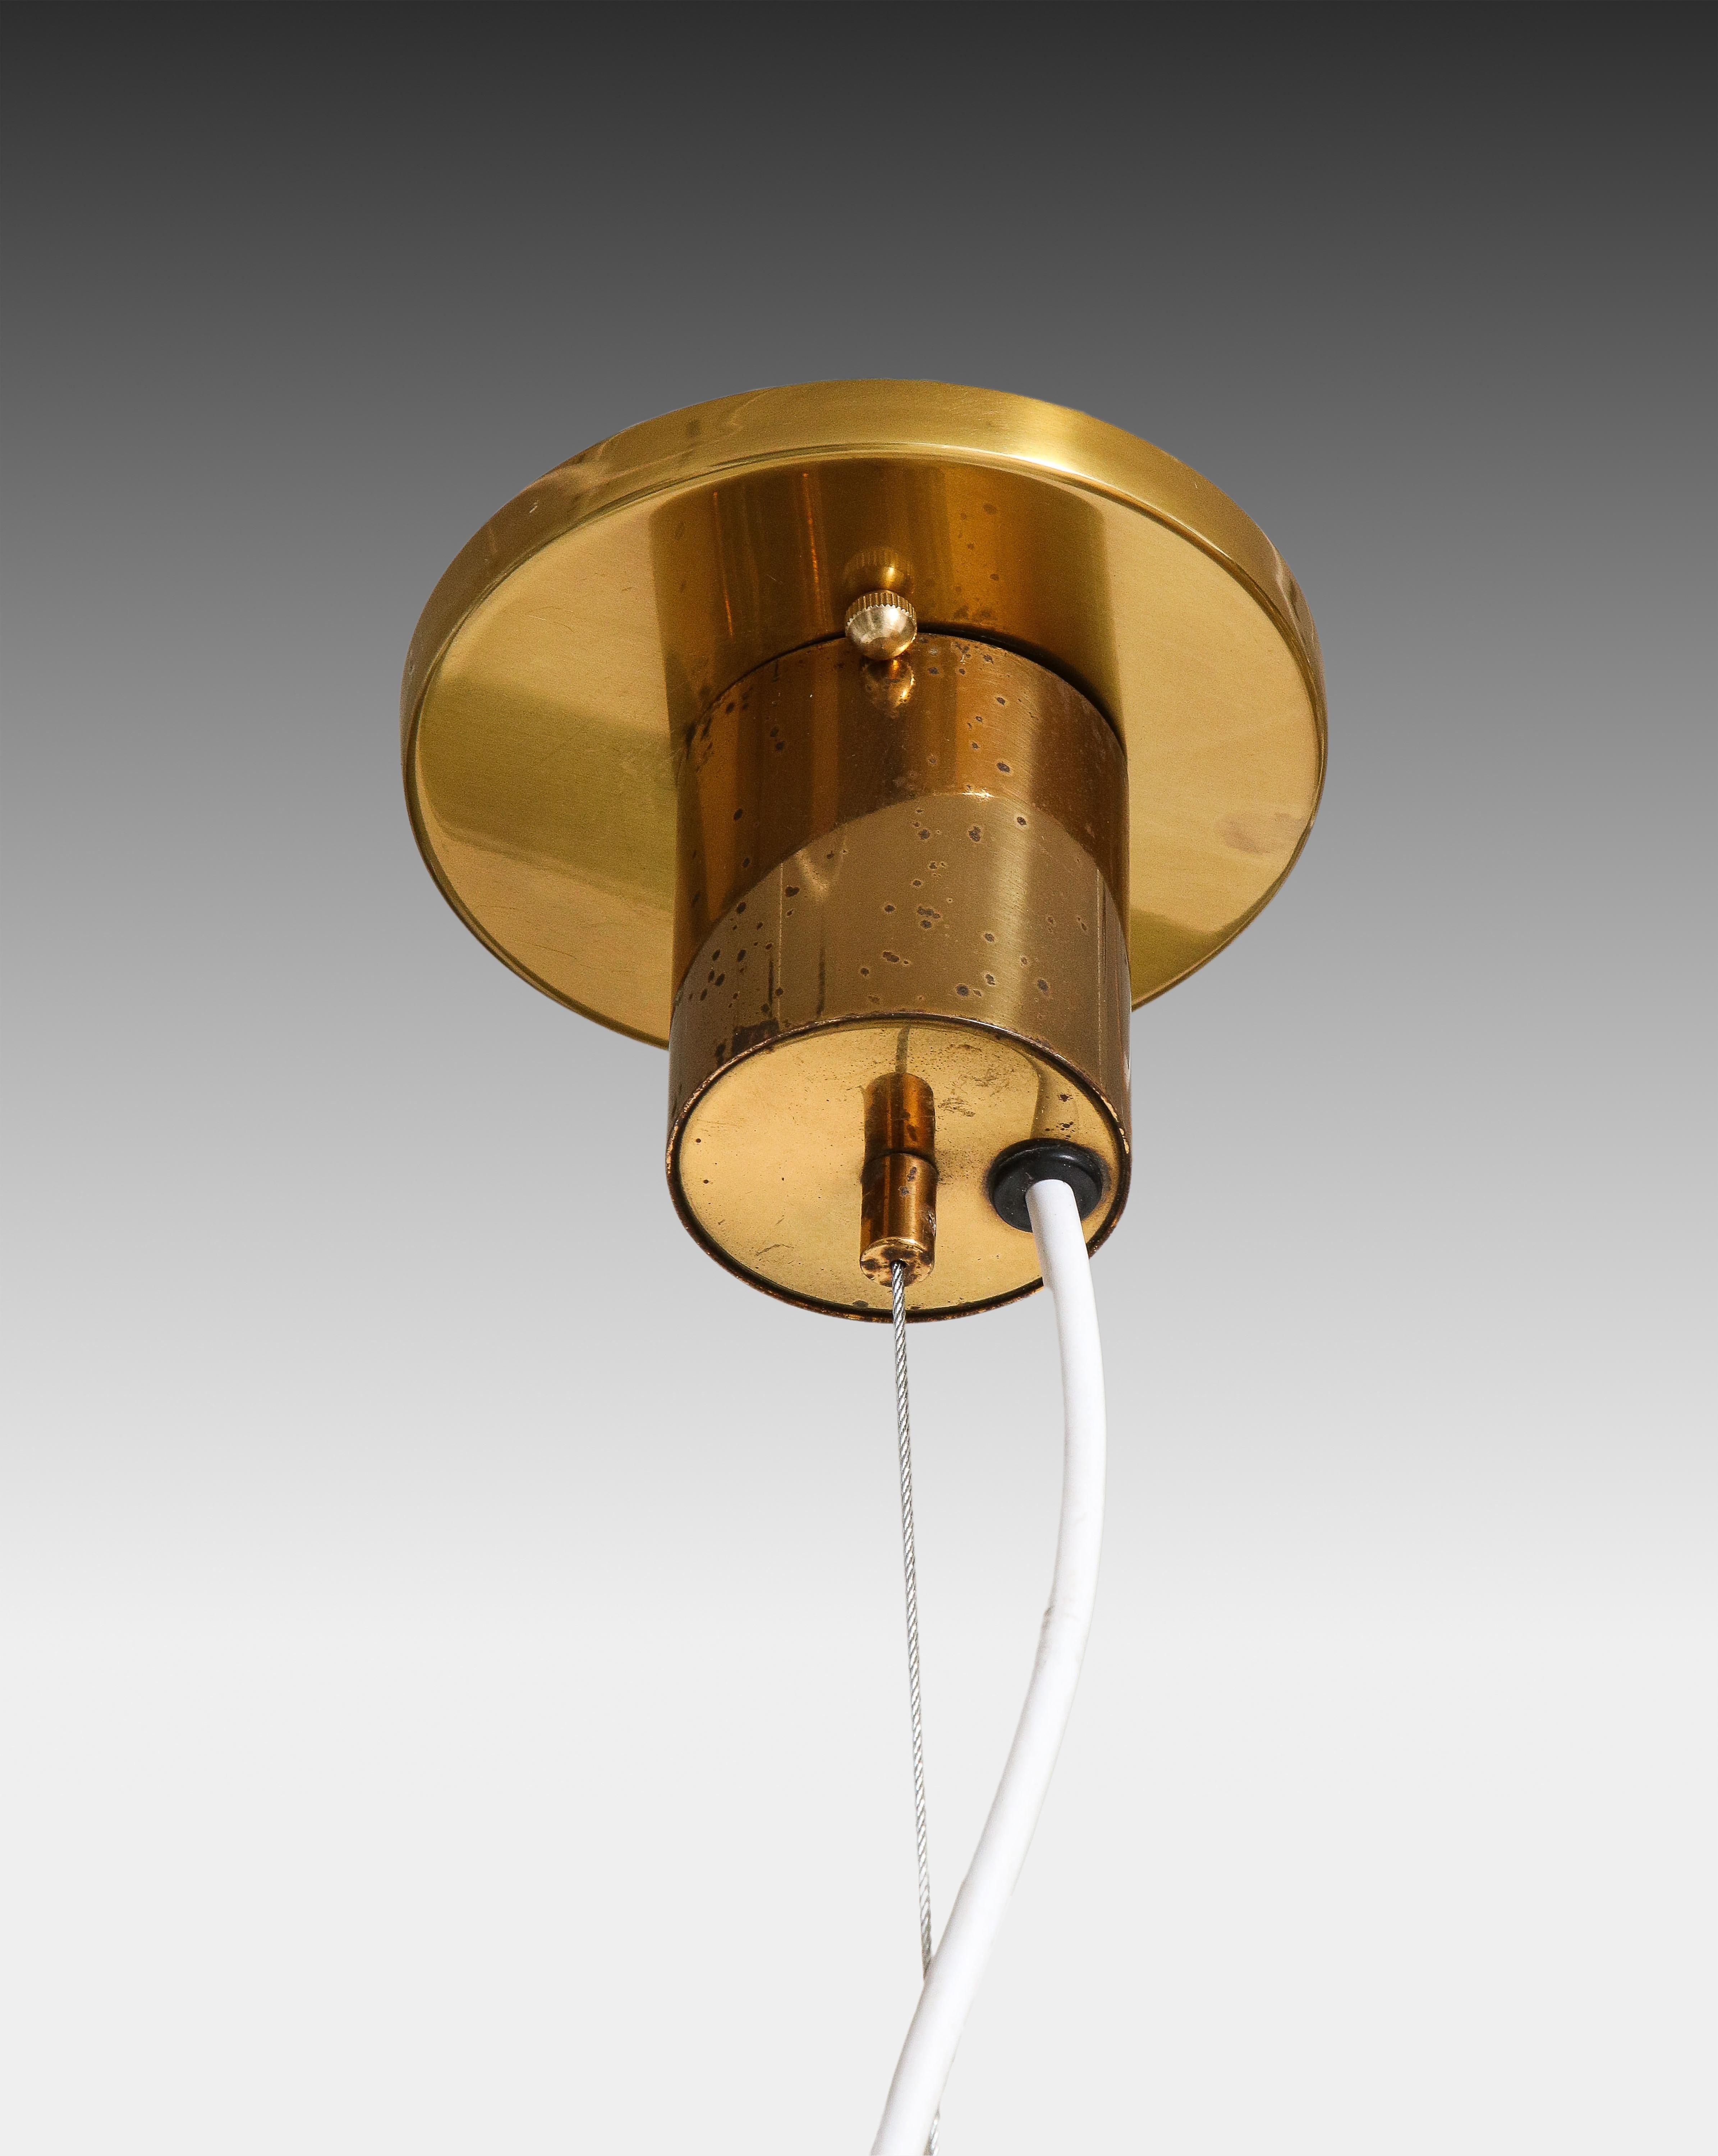 Original Stilnovo suspension or pendant light model 1104 with opaque satin glass diffuser, enameled metal, original brass canopy with matching custom ceiling plate. The opaque glass diffuser is suspended by a wire so the overall height is